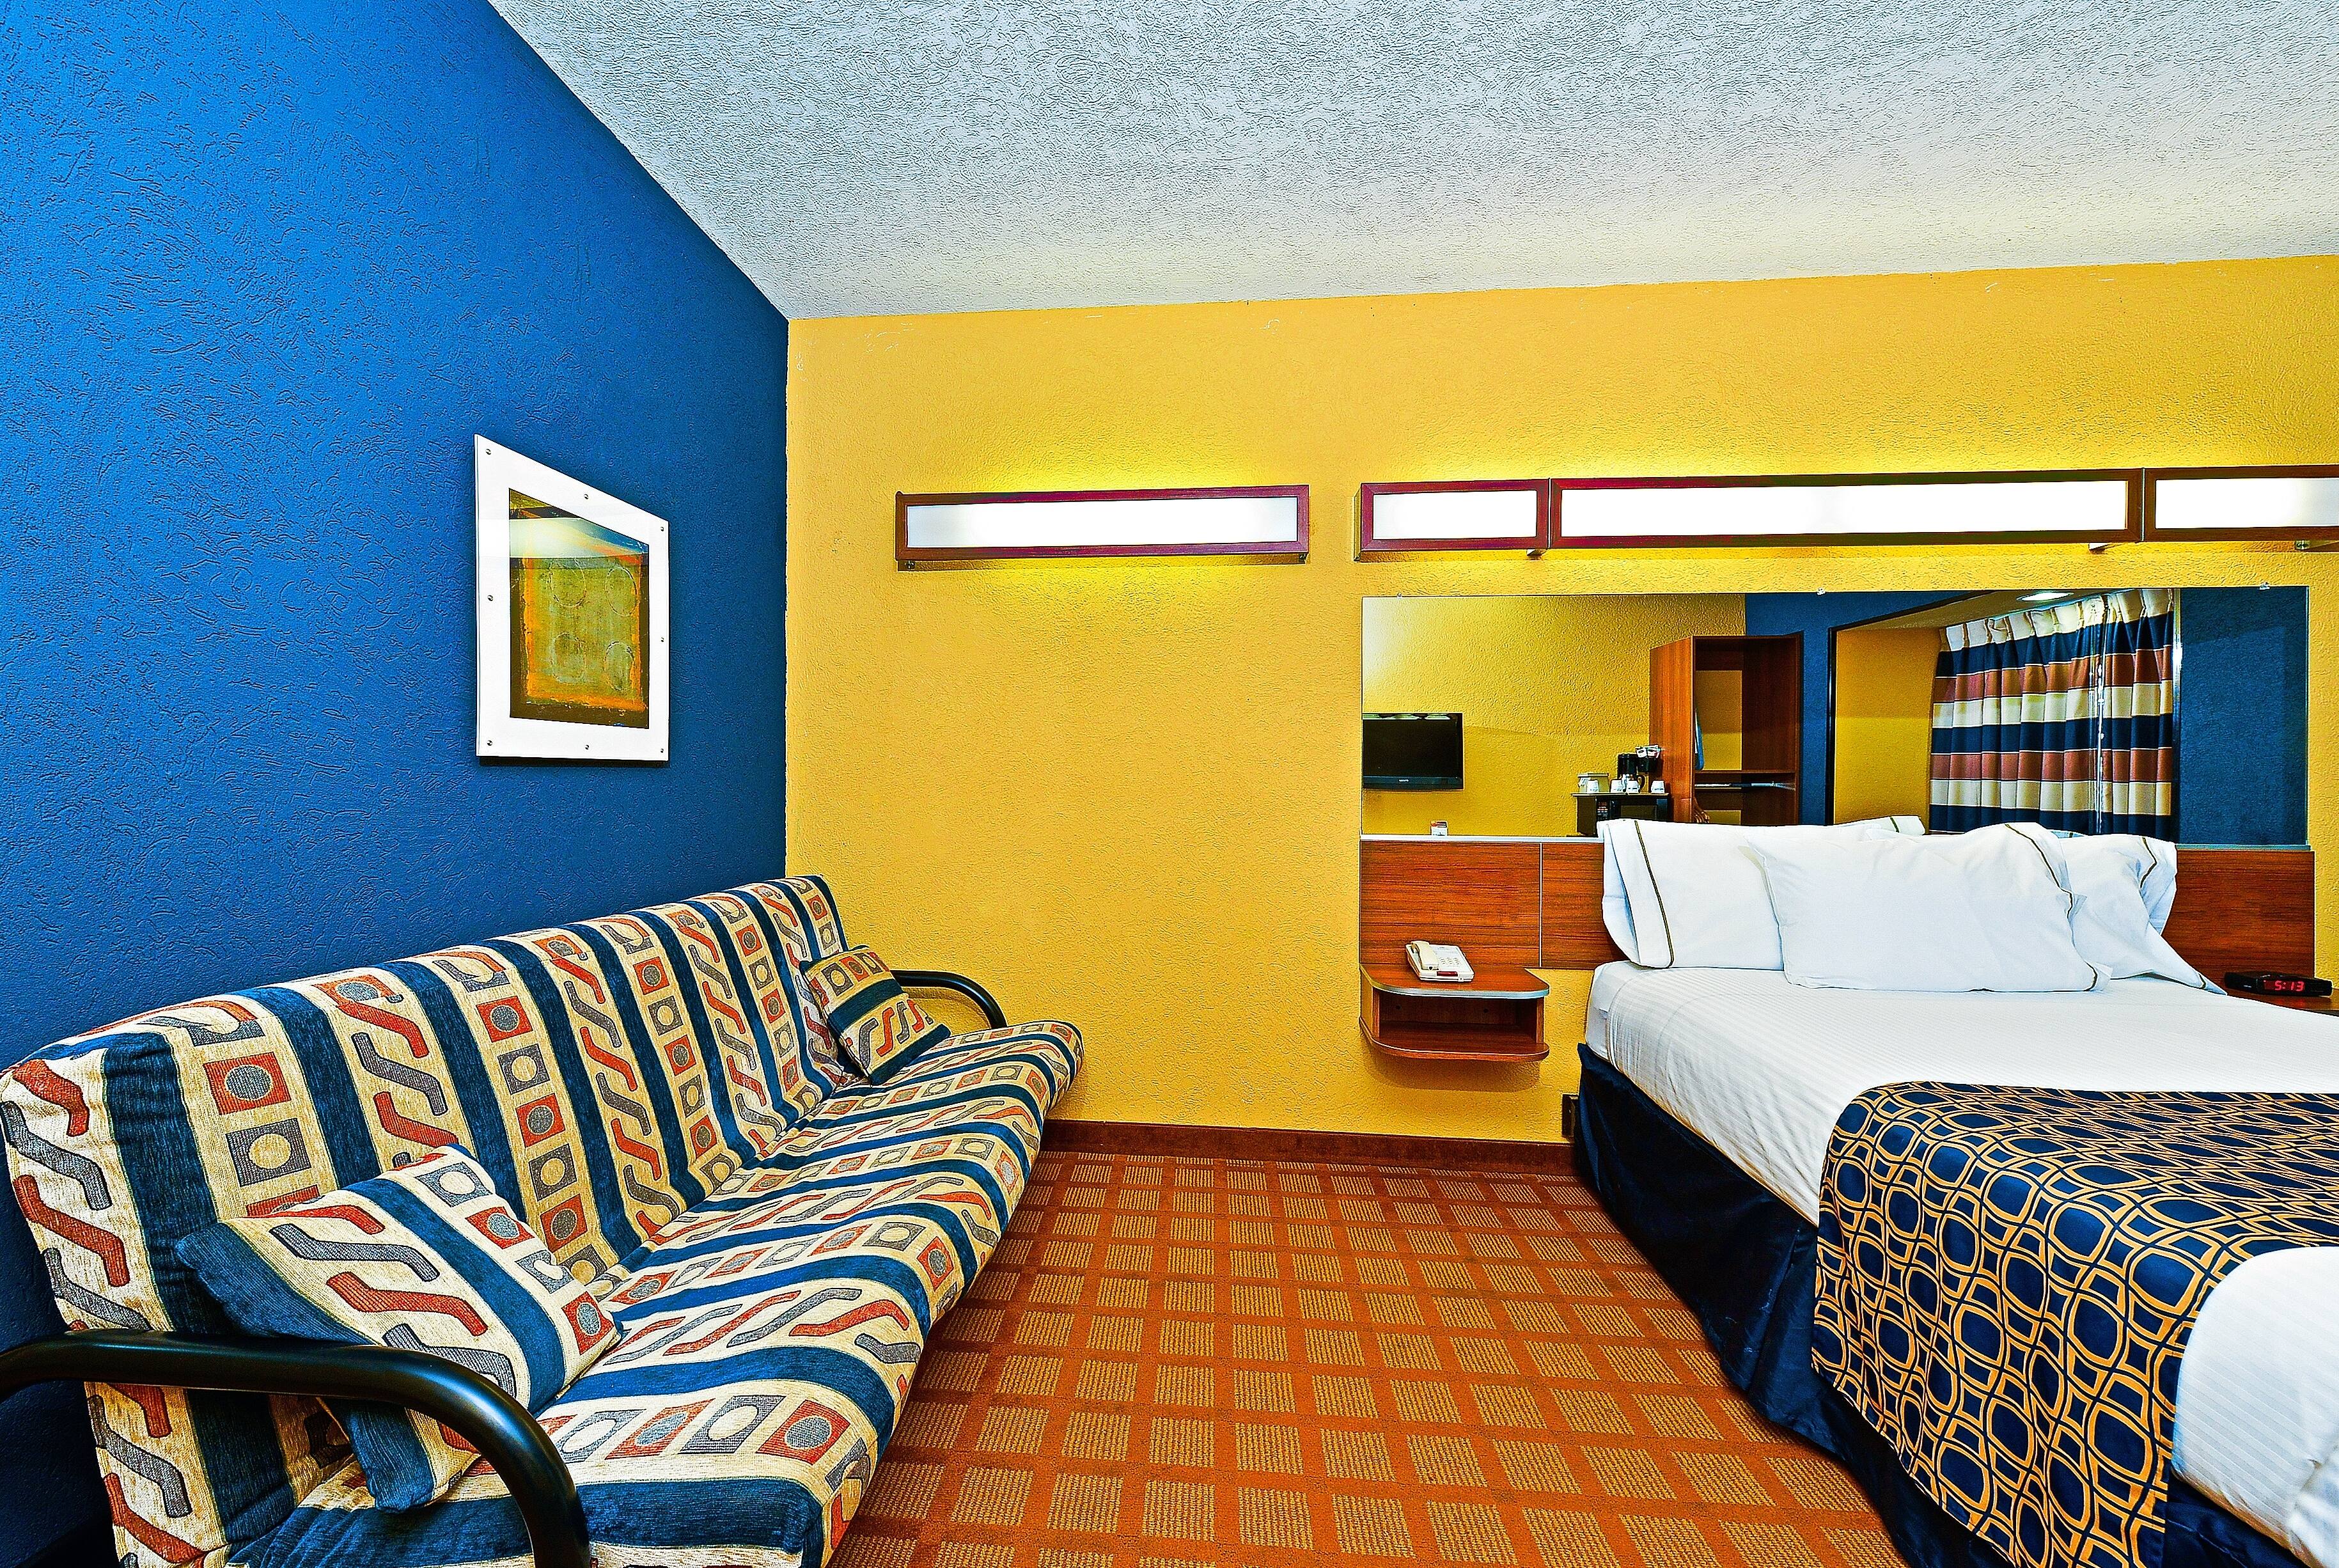 Discount [60% Off] Microtel Inn Suites By Wyndham New Braunfels United States | 4 Hour Hotel Near Me